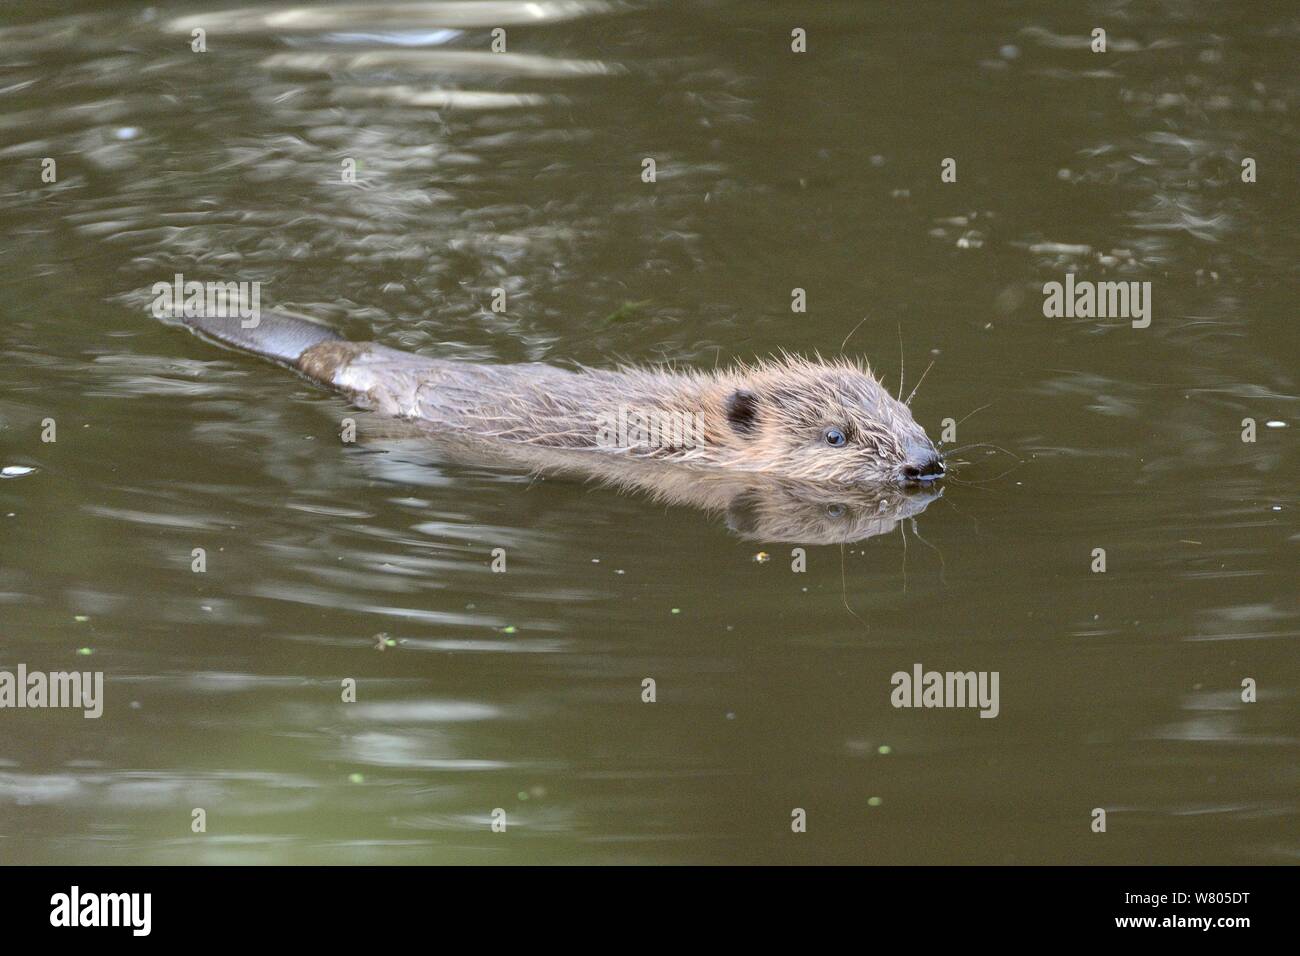 Young Eurasian beaver (Castor fiber) kit swimming at dusk, born in the wild on the River Otter, part of a release project managed by the Devon Wildlife Trust, Devon, England, UK, August 2015. Stock Photo